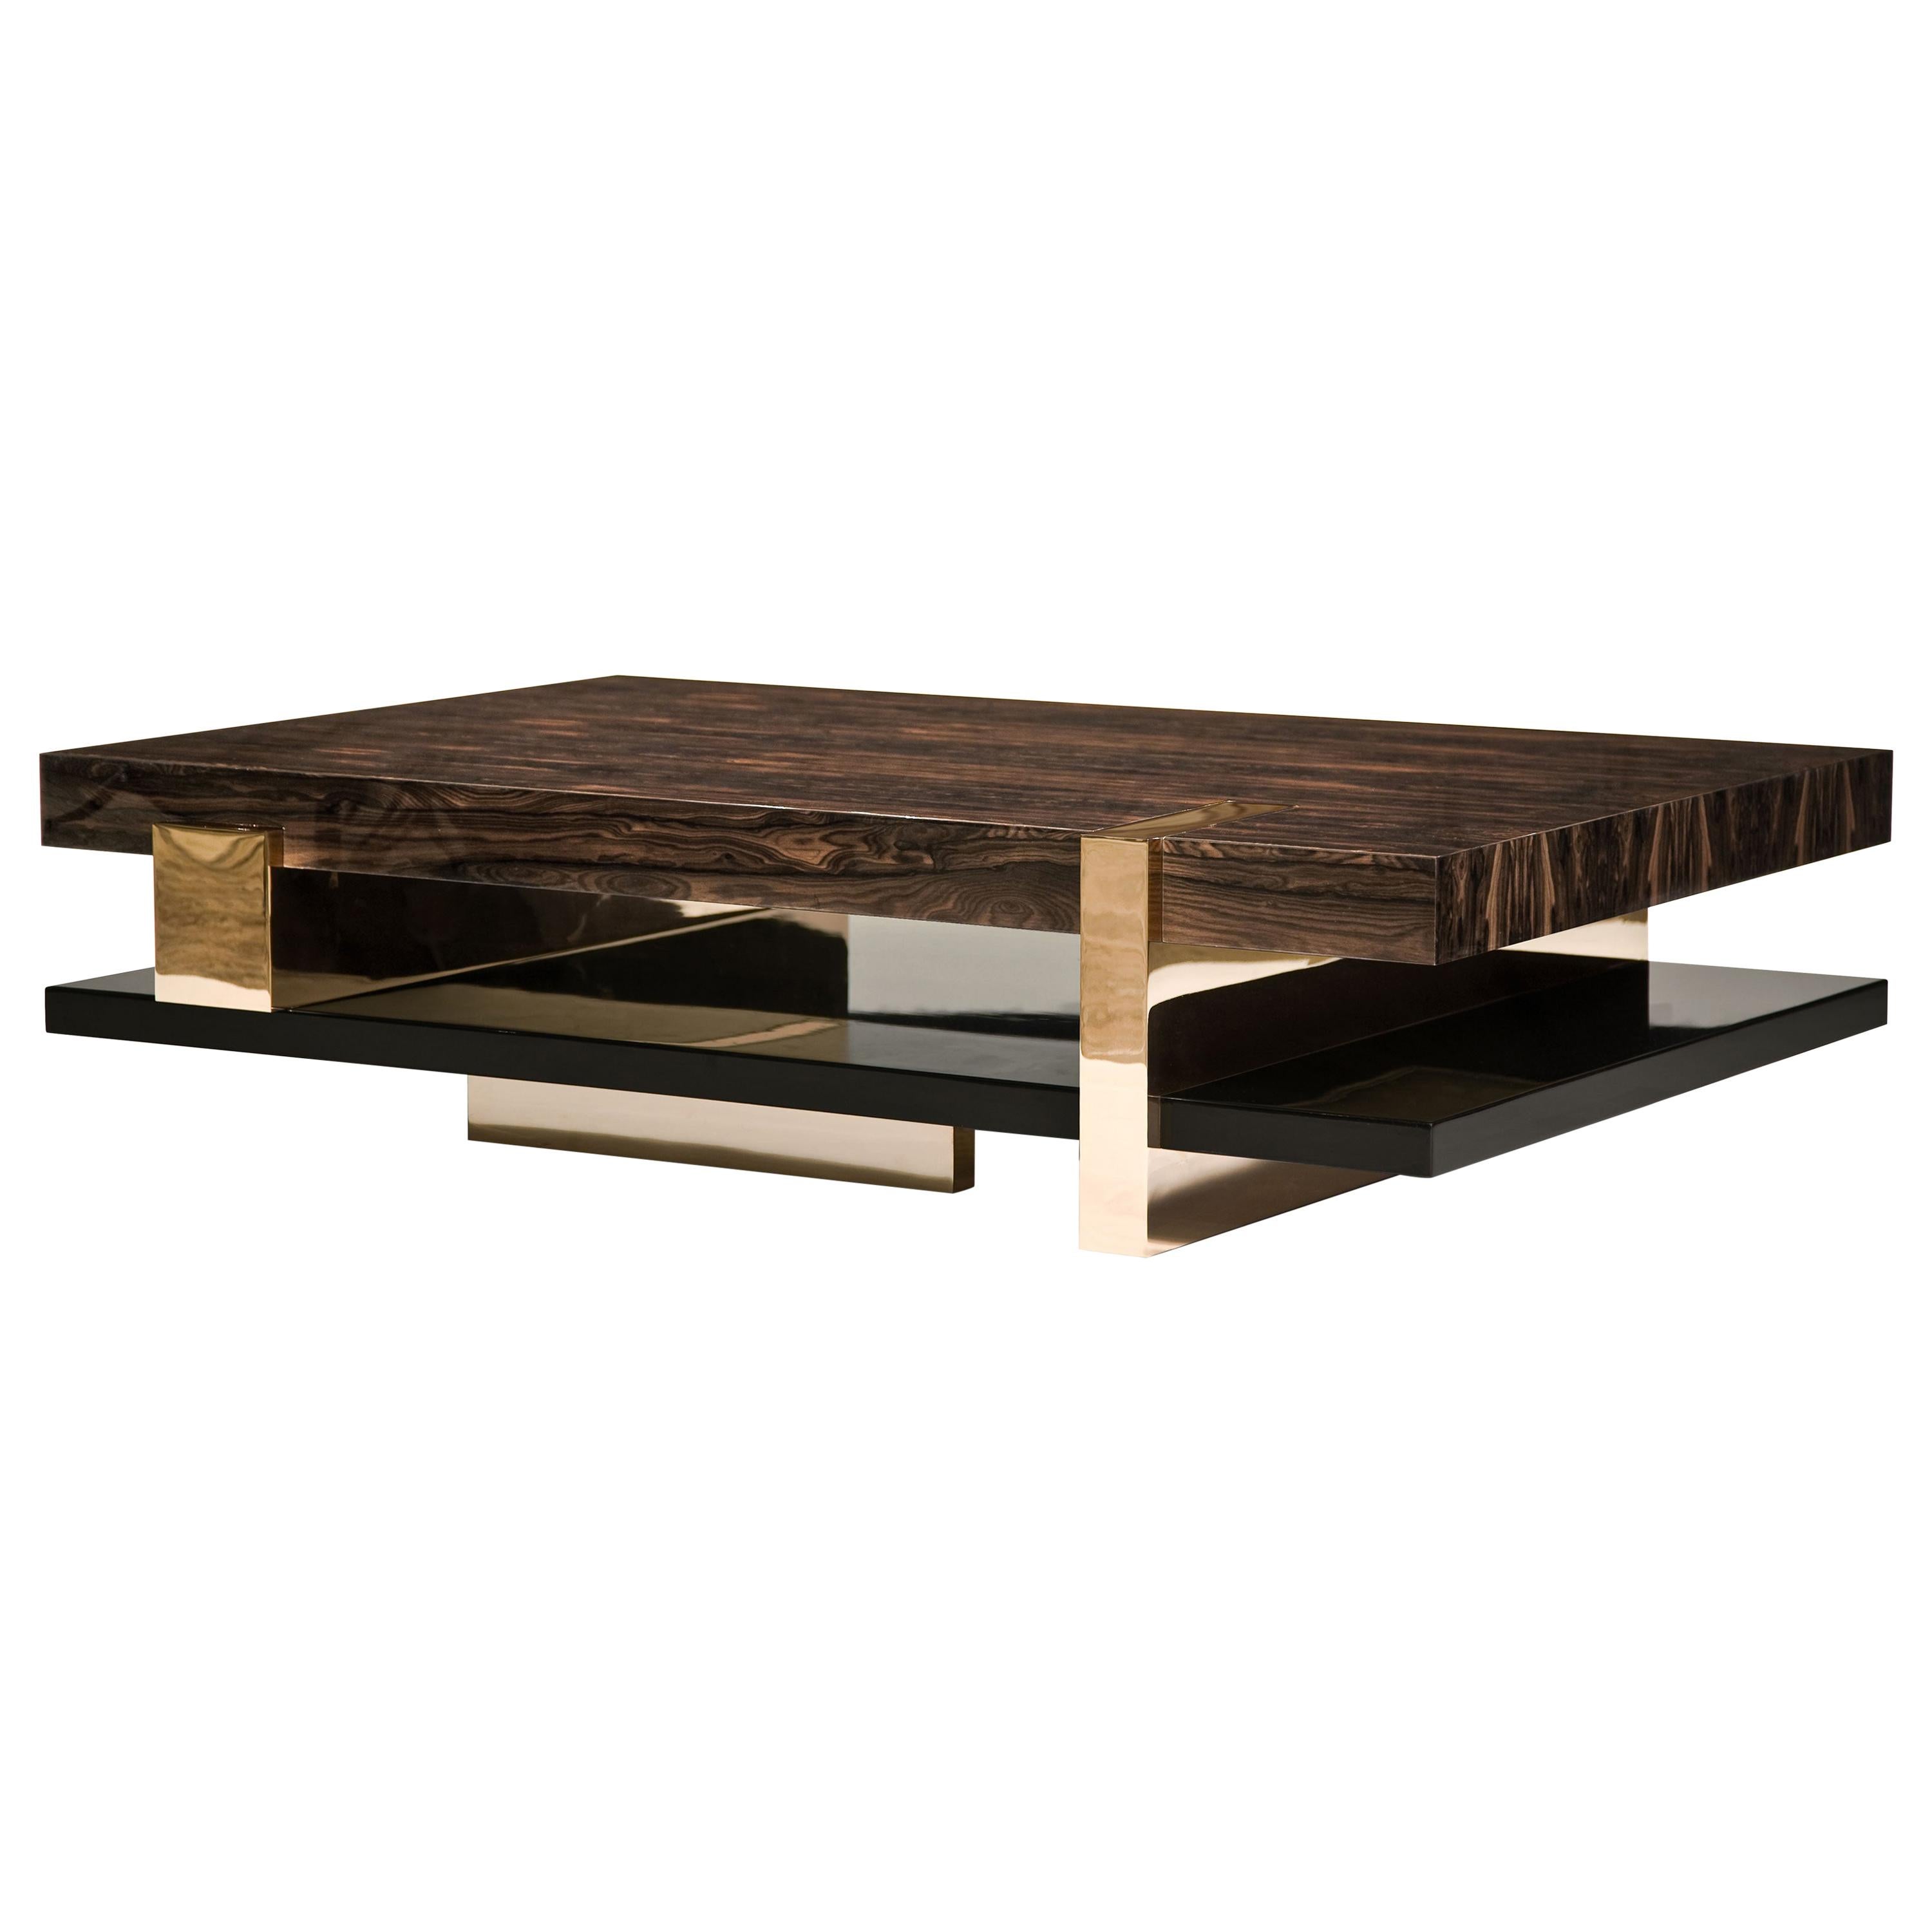 Pierre Coffee Table:  Bespoke Table in Stainless Steel, Bronze and Wood For Sale